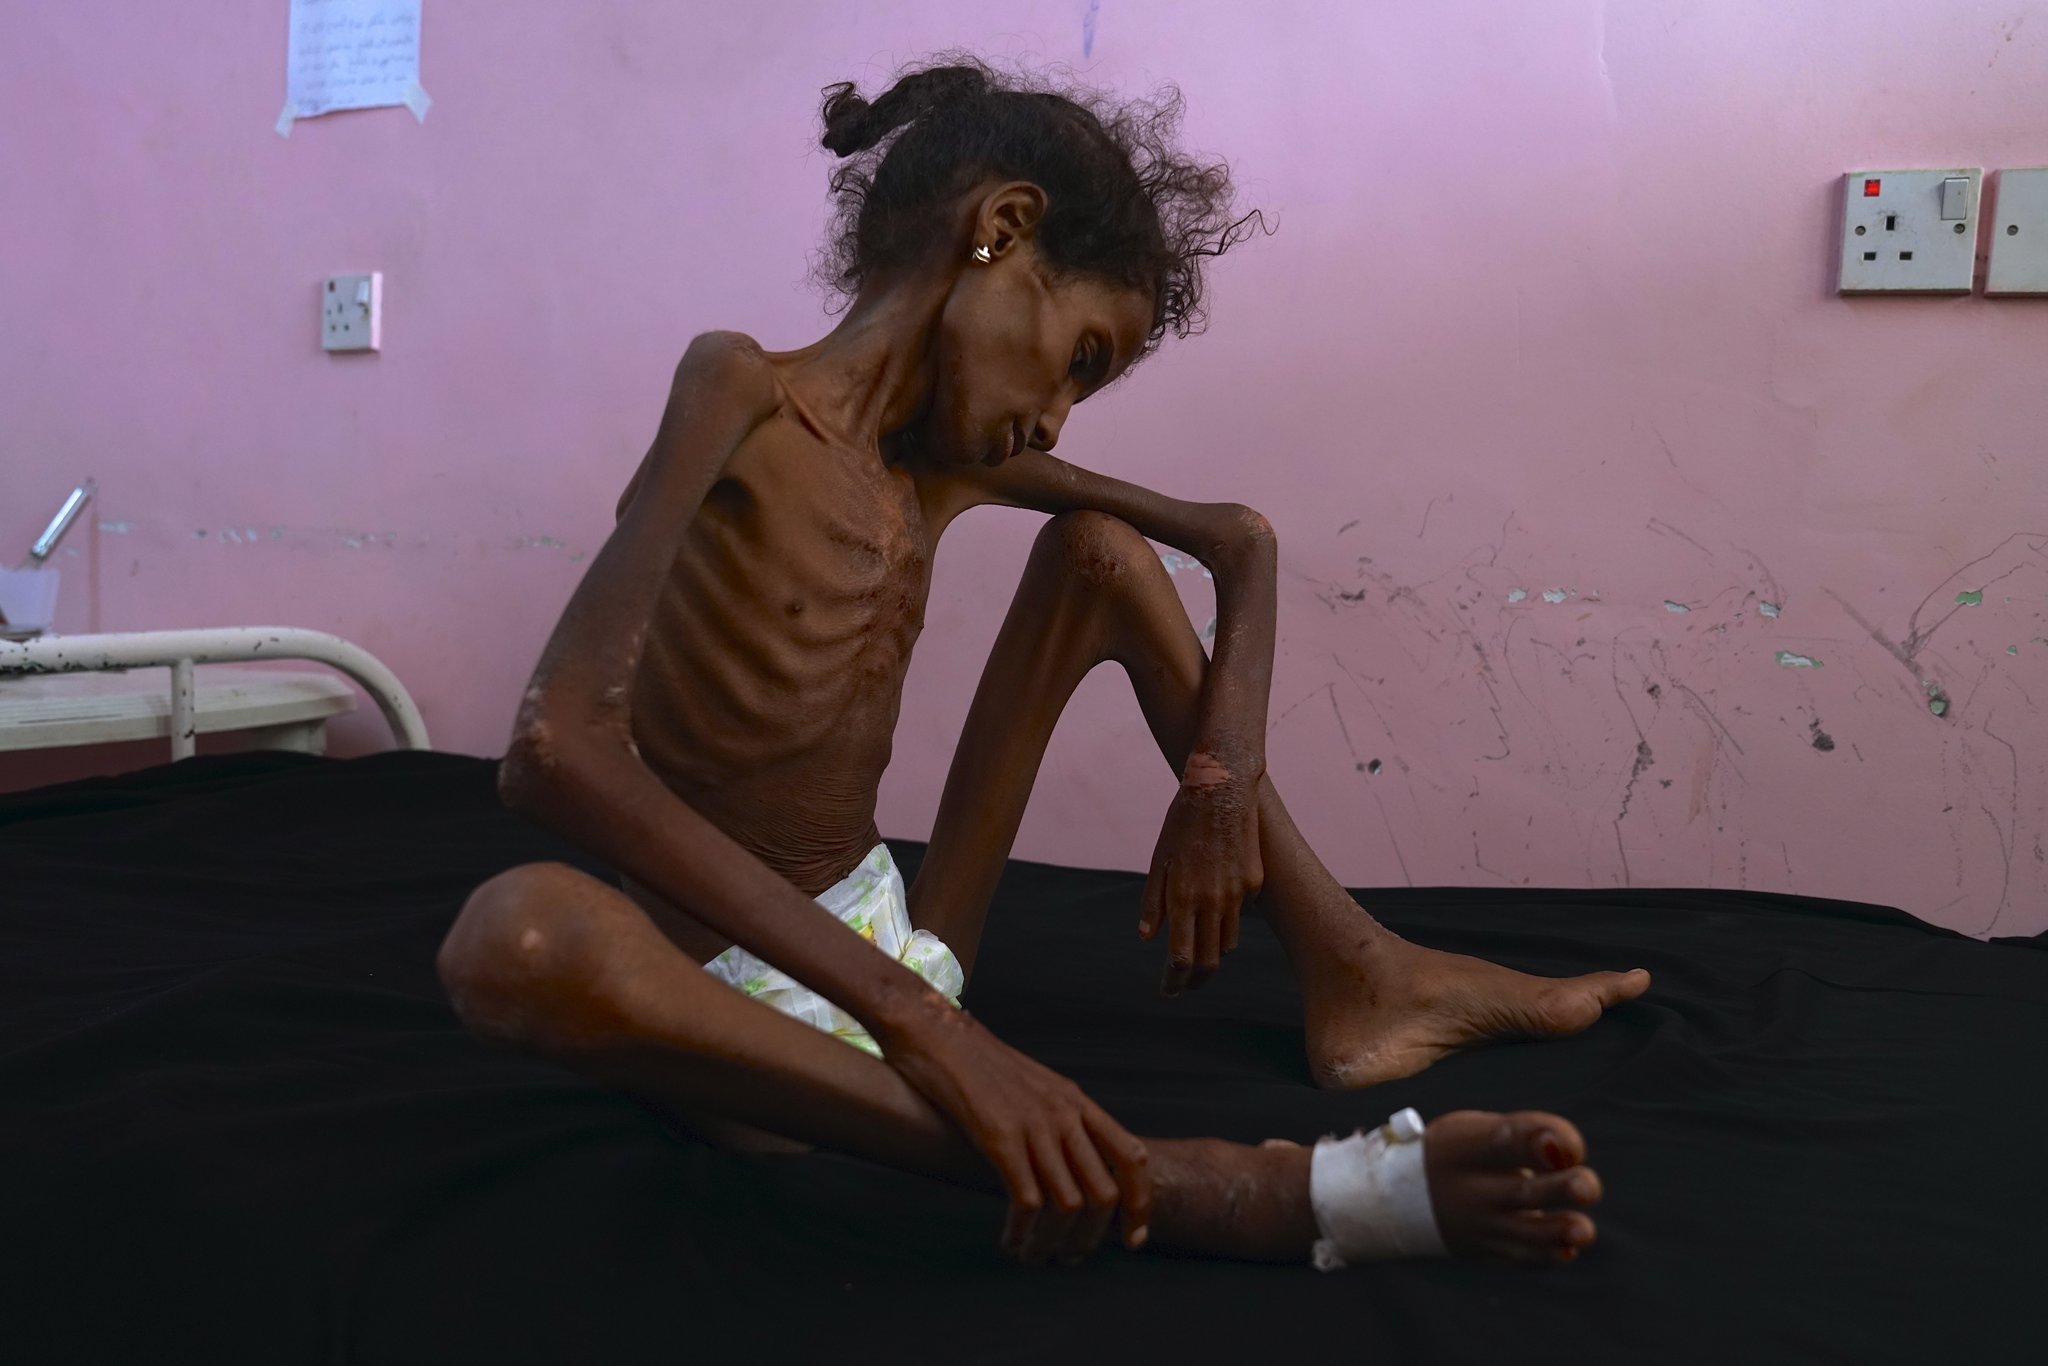 Abrar Ibrahim, a 12-year-old girl in Yemen who weighs just 28 pounds